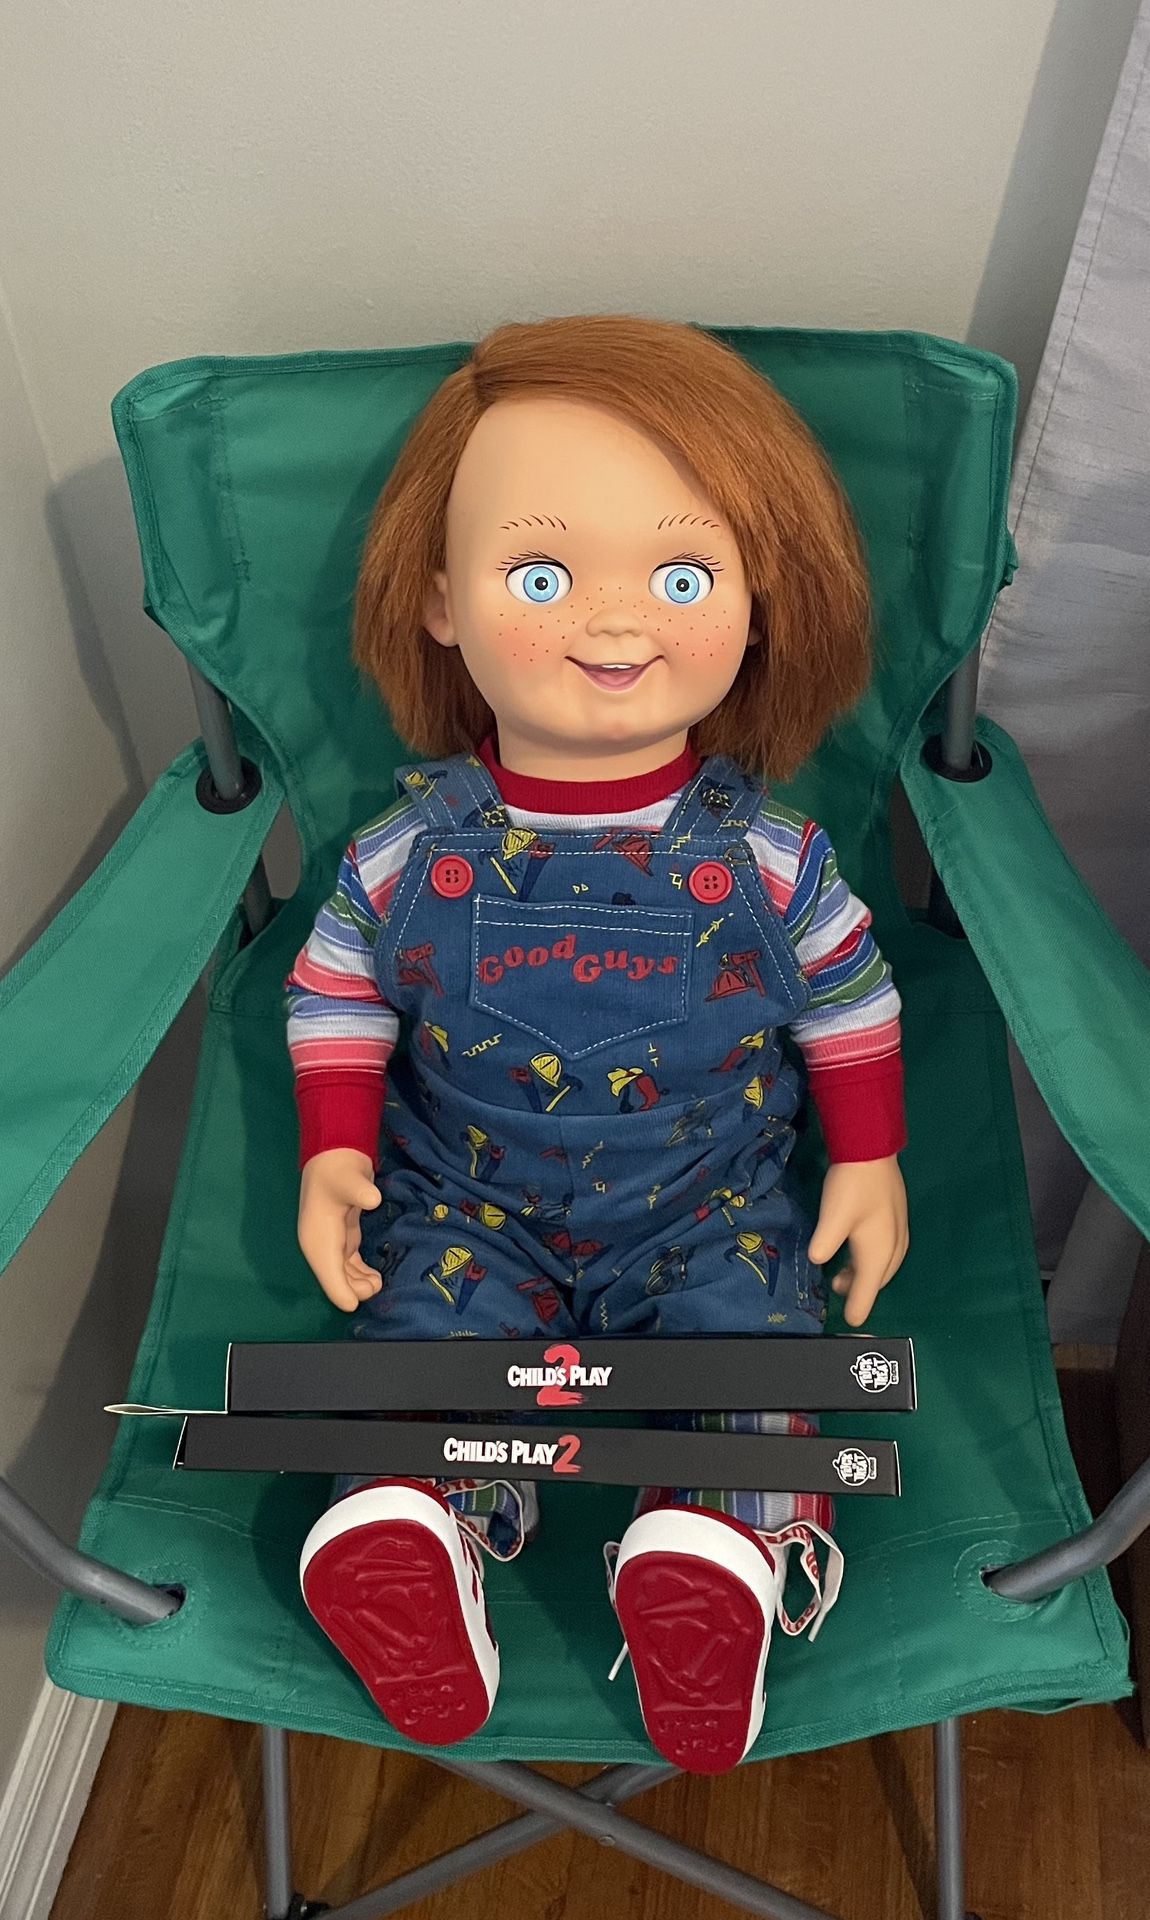 Child's Play Doll